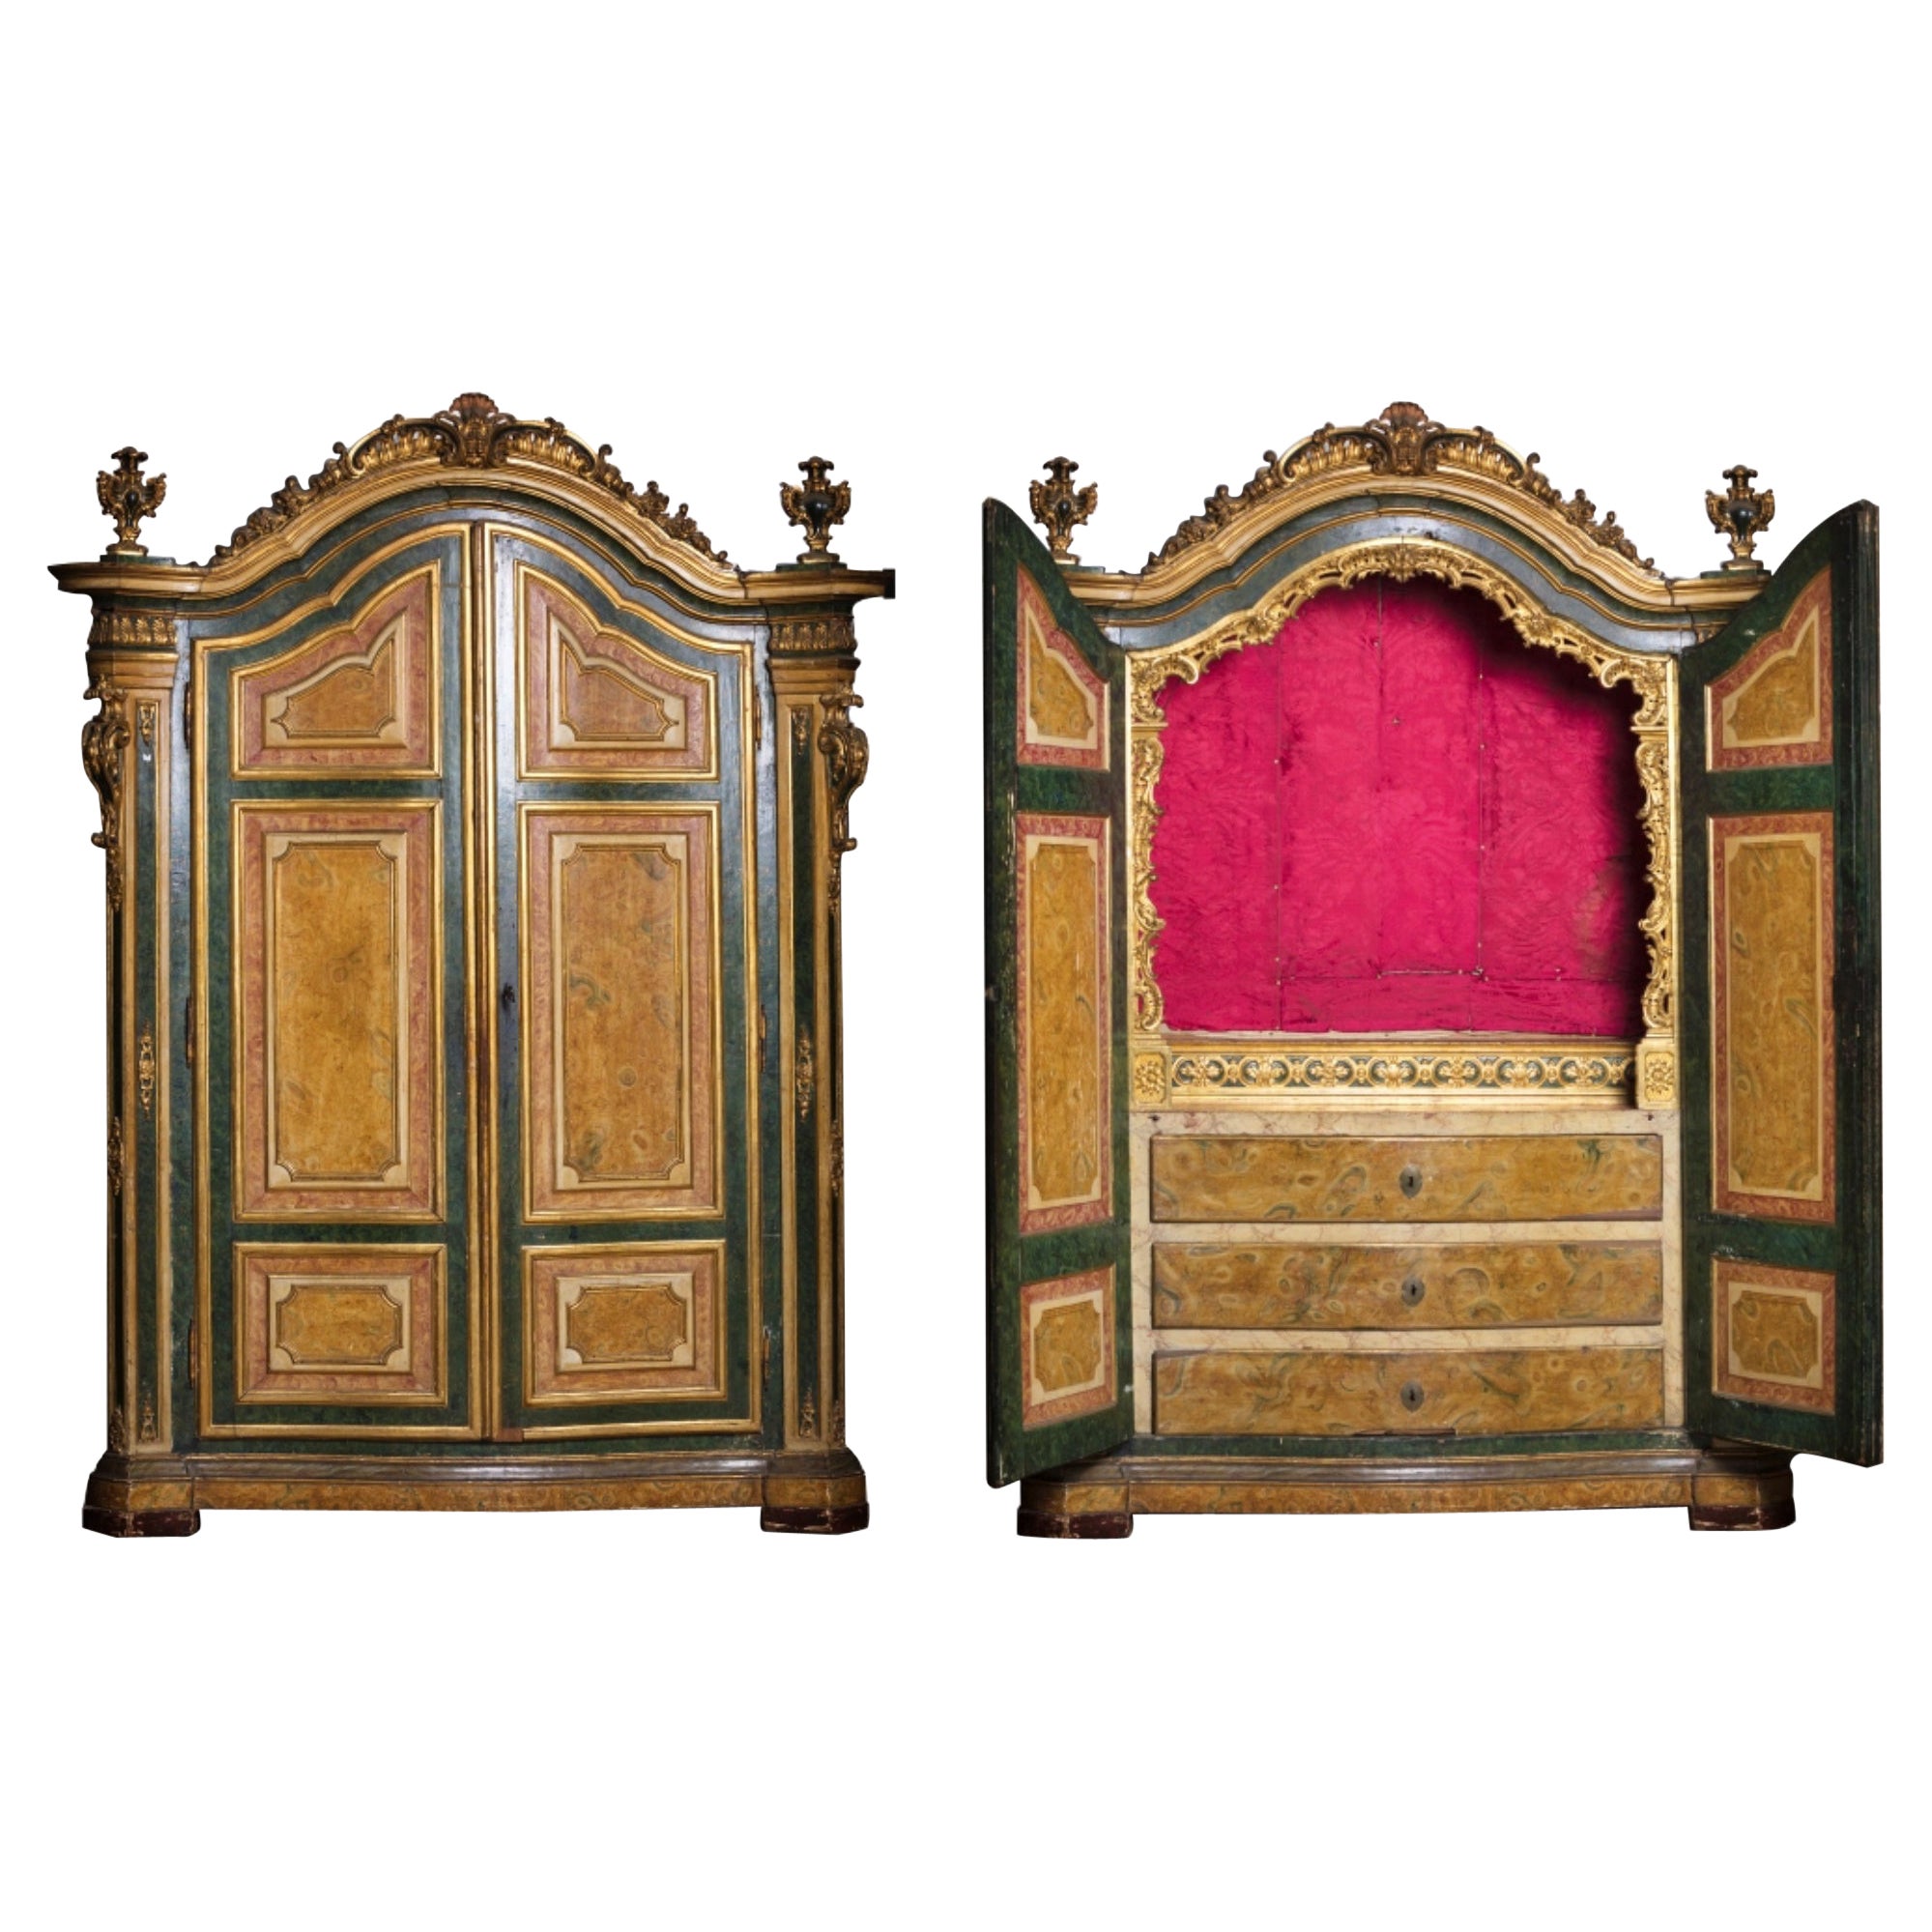 Rare and Important Portuguese Church Cabinet 18th Century Published